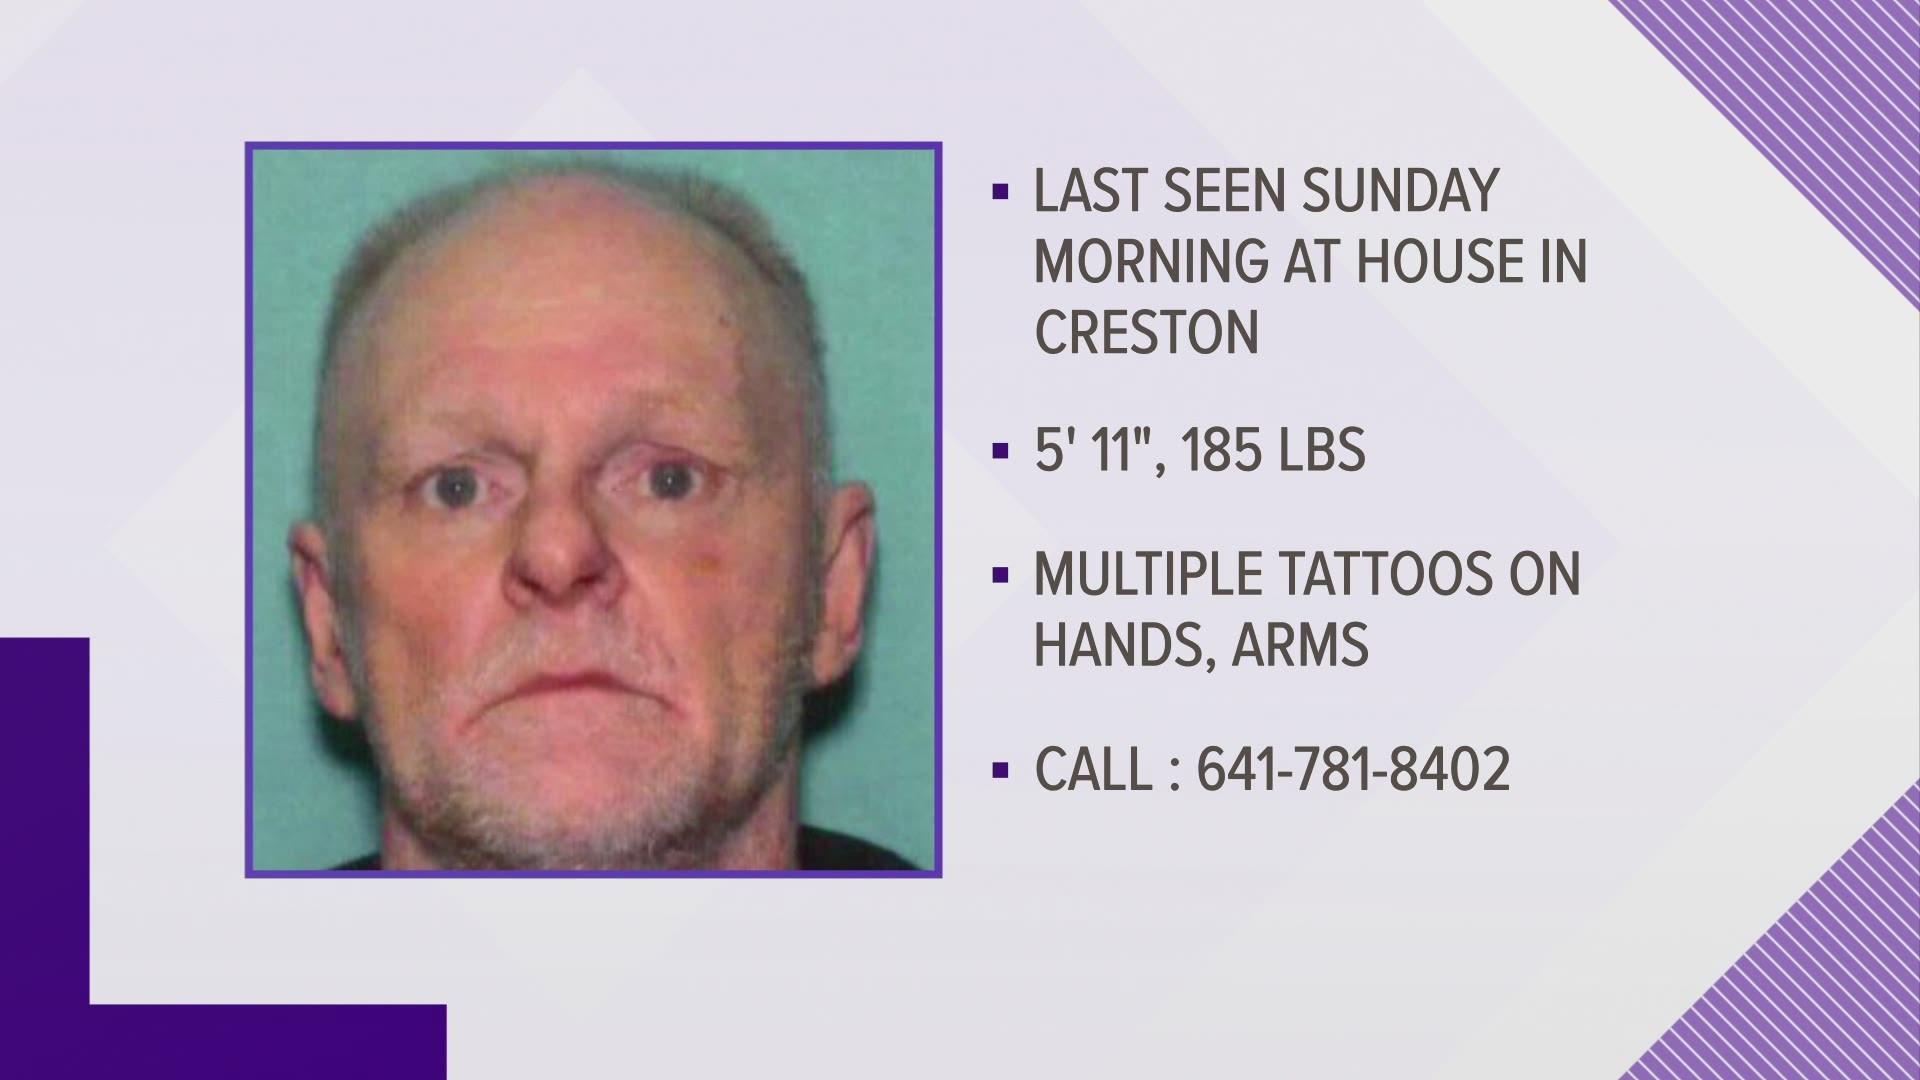 Tim Fechter, 58, was last seen on Father's Day. The DCI said there are no known or ongoing threats to the public in connection to his disappearance.